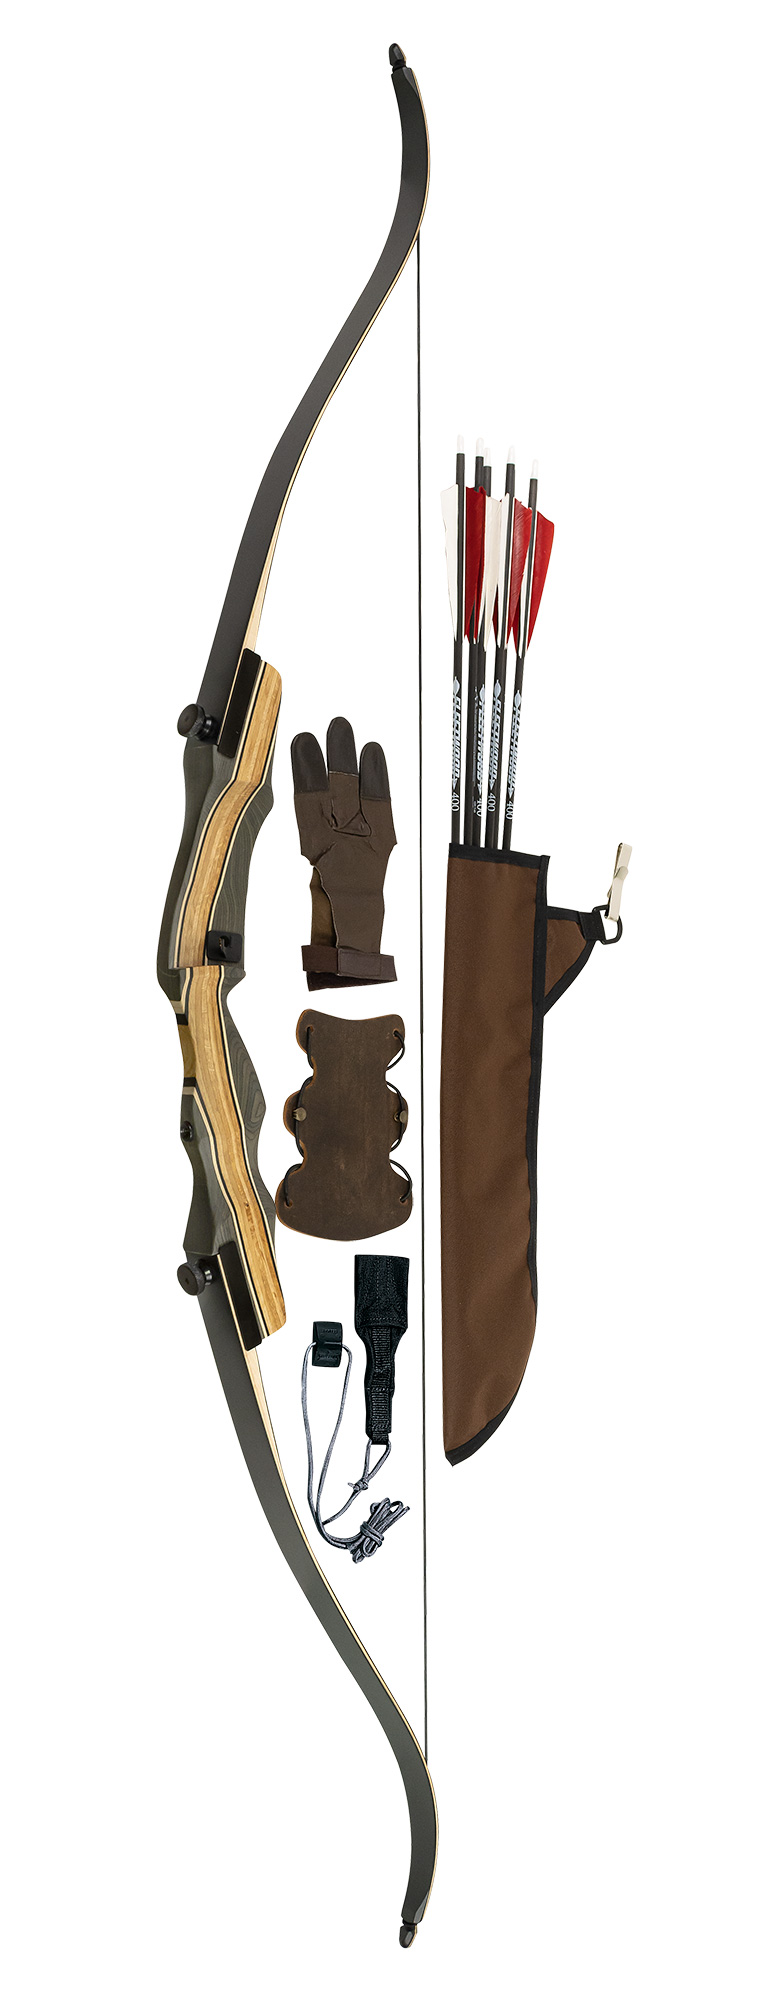 The Adult Recurve Bow Kit